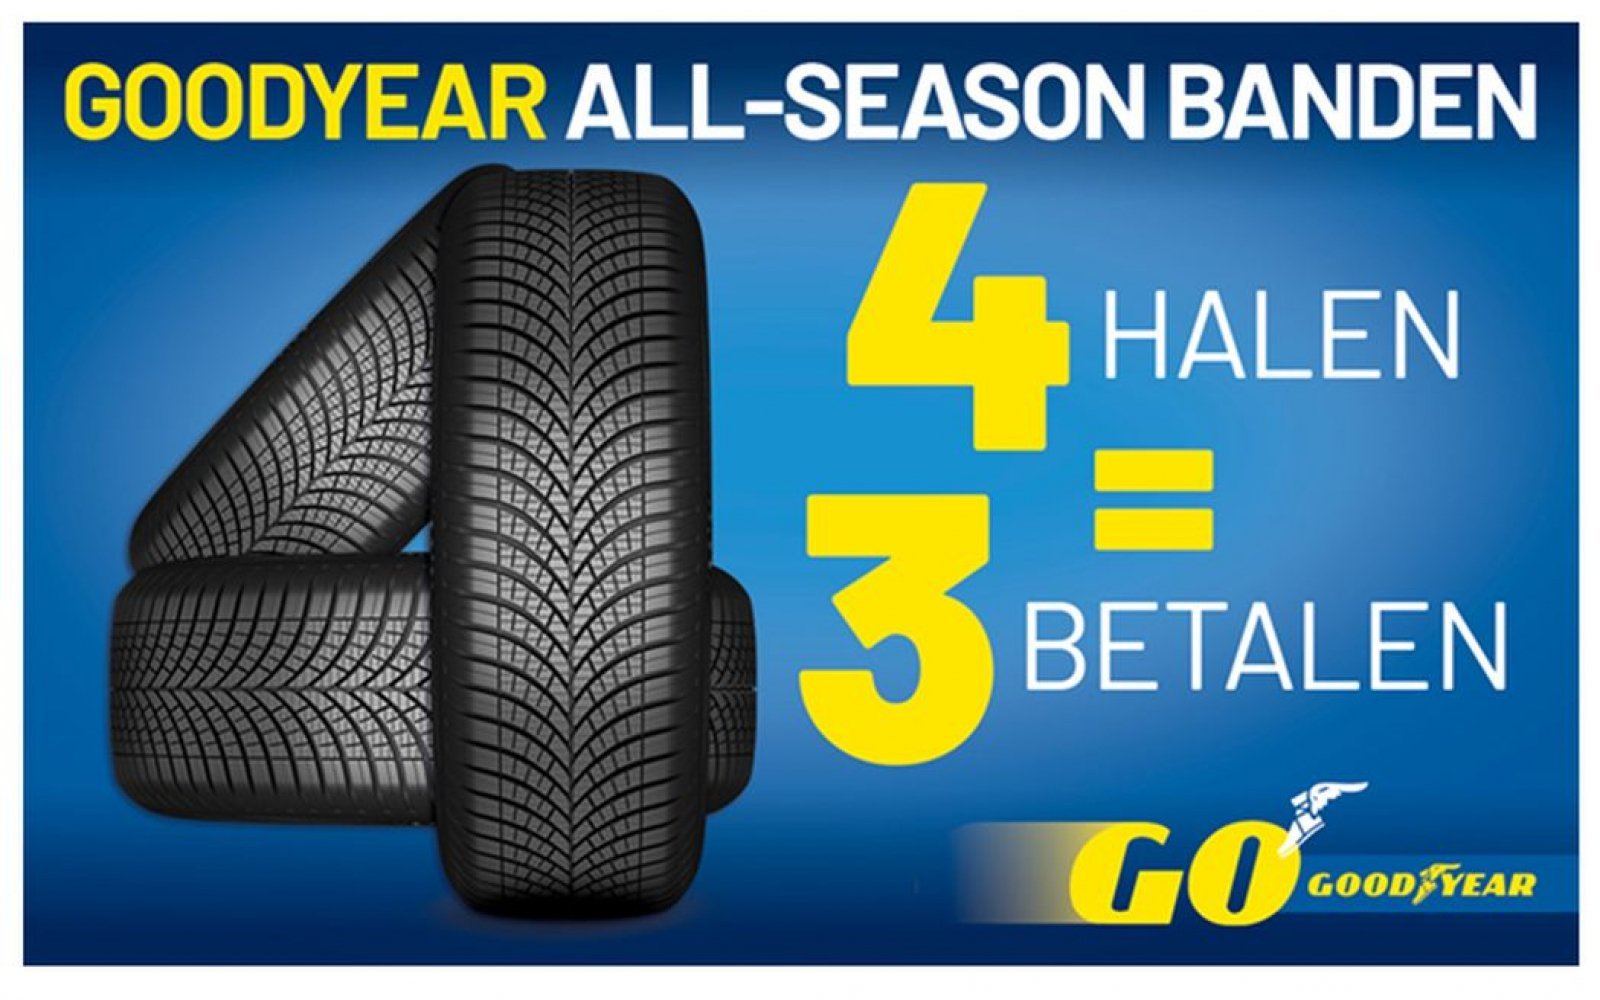 Summer tires, winter tires, all-season tires: which one should you have?